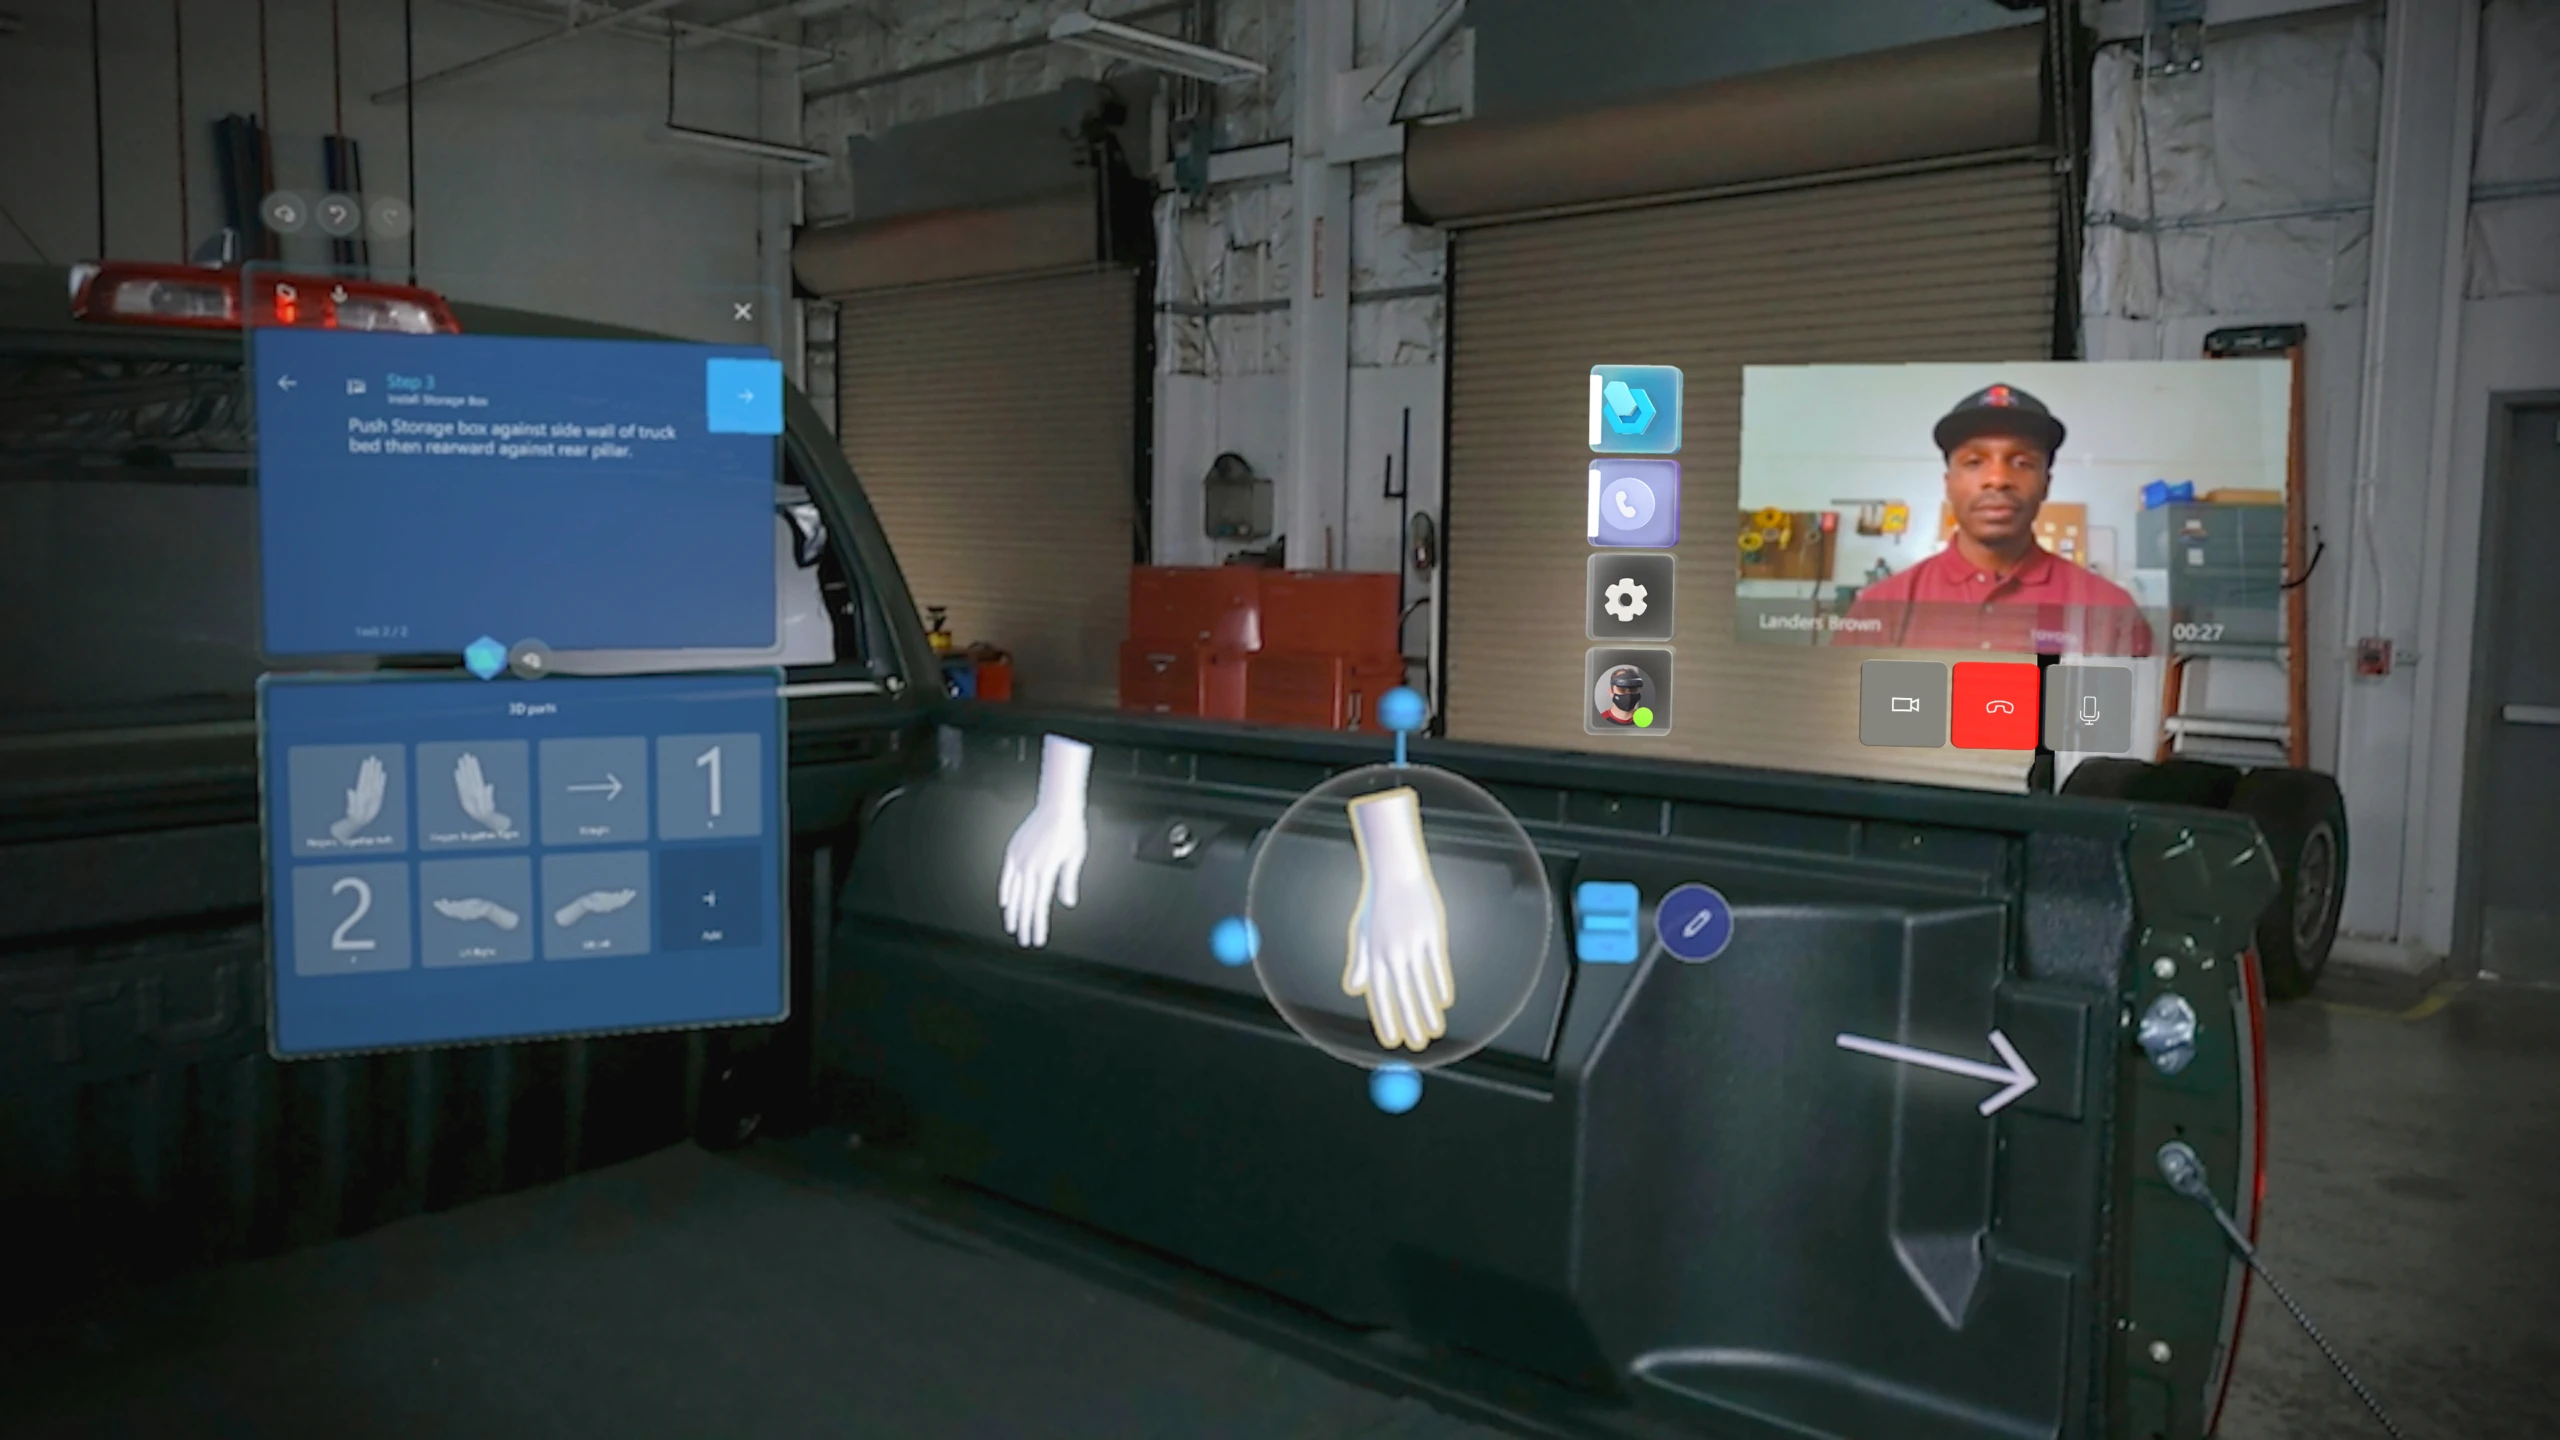 A user’s mixed reality view from their HoloLens, showing work instructions on a vehicle with a holographic video call window for real-time discussion with a remote colleague.